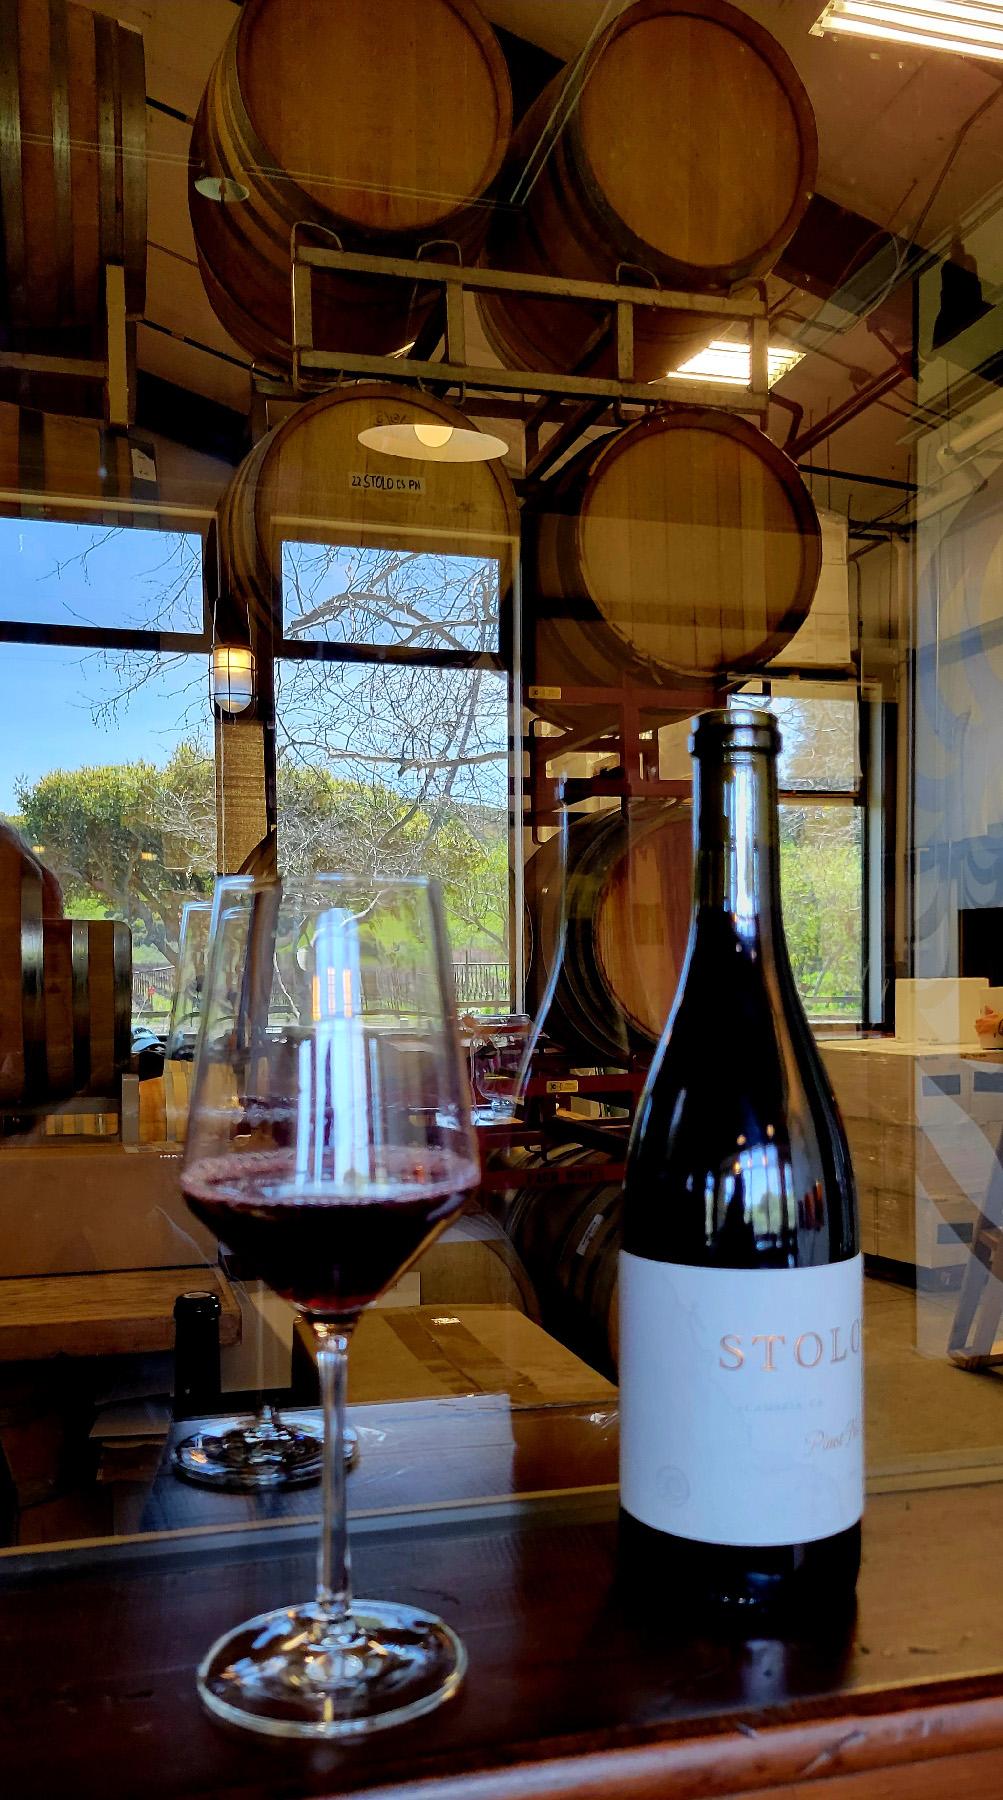 Wine-tasting at Stolo Vineyards and Winery completes a visit to Cambria, California. (Photo courtesy of Jim Farber)